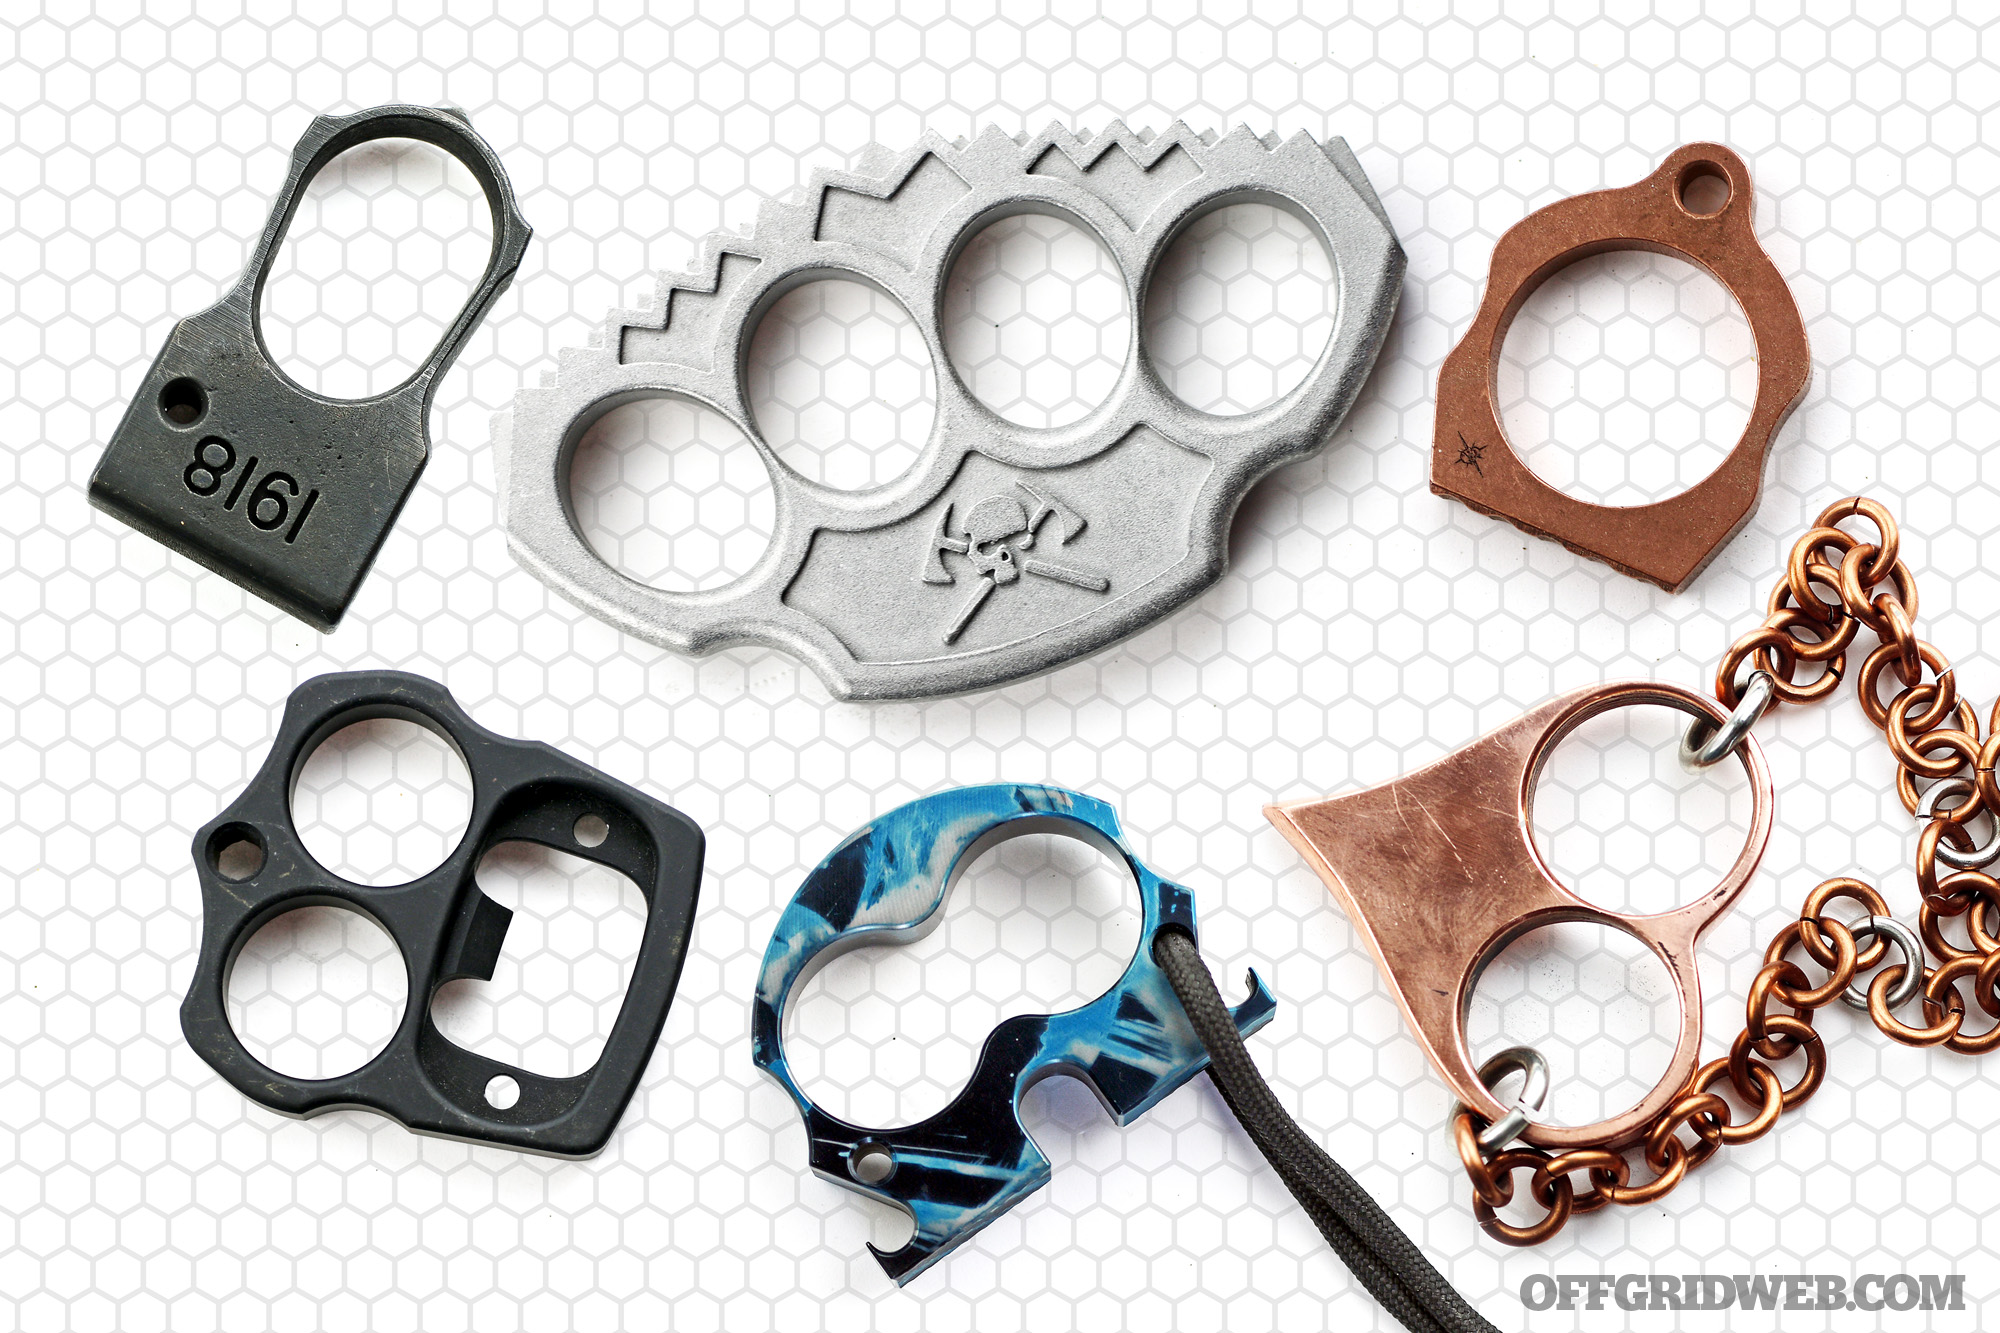 How to Use Brass Knuckles: Everything You Never Needed to Know